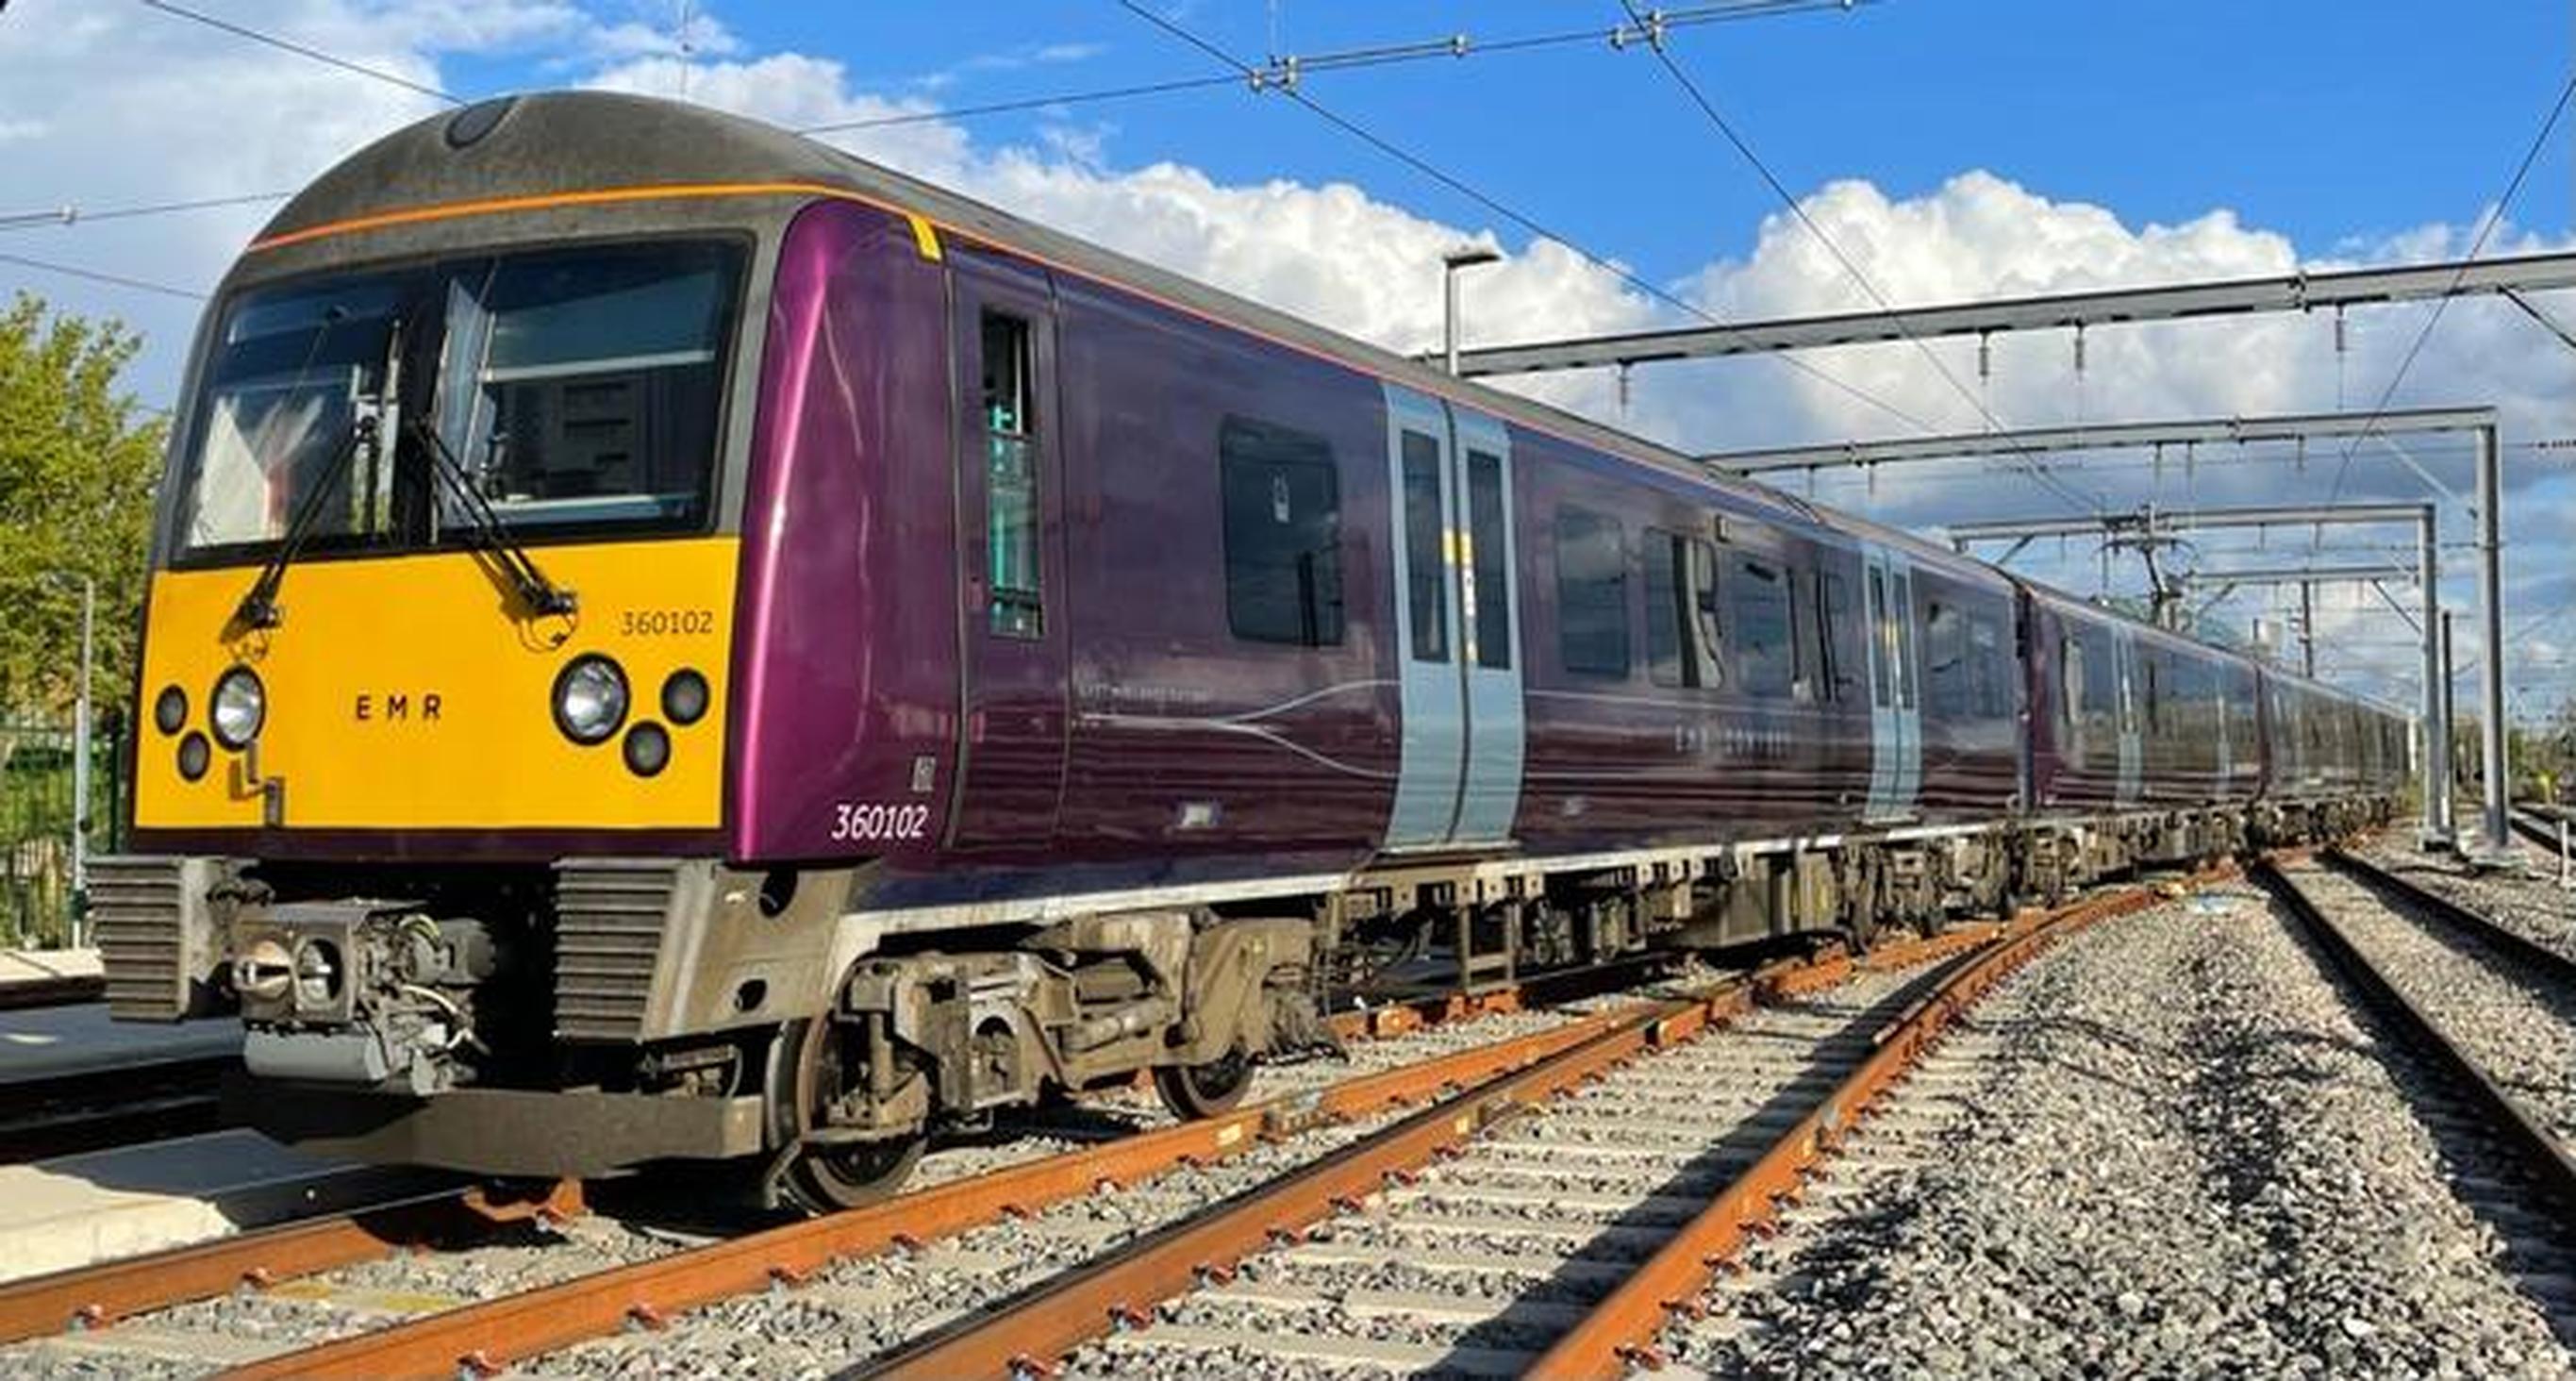 East Midland`s Railway`s (EMR) first electric service has launched helping to reduce carbon emissions by 77% on its route between Corby and London St Pancras